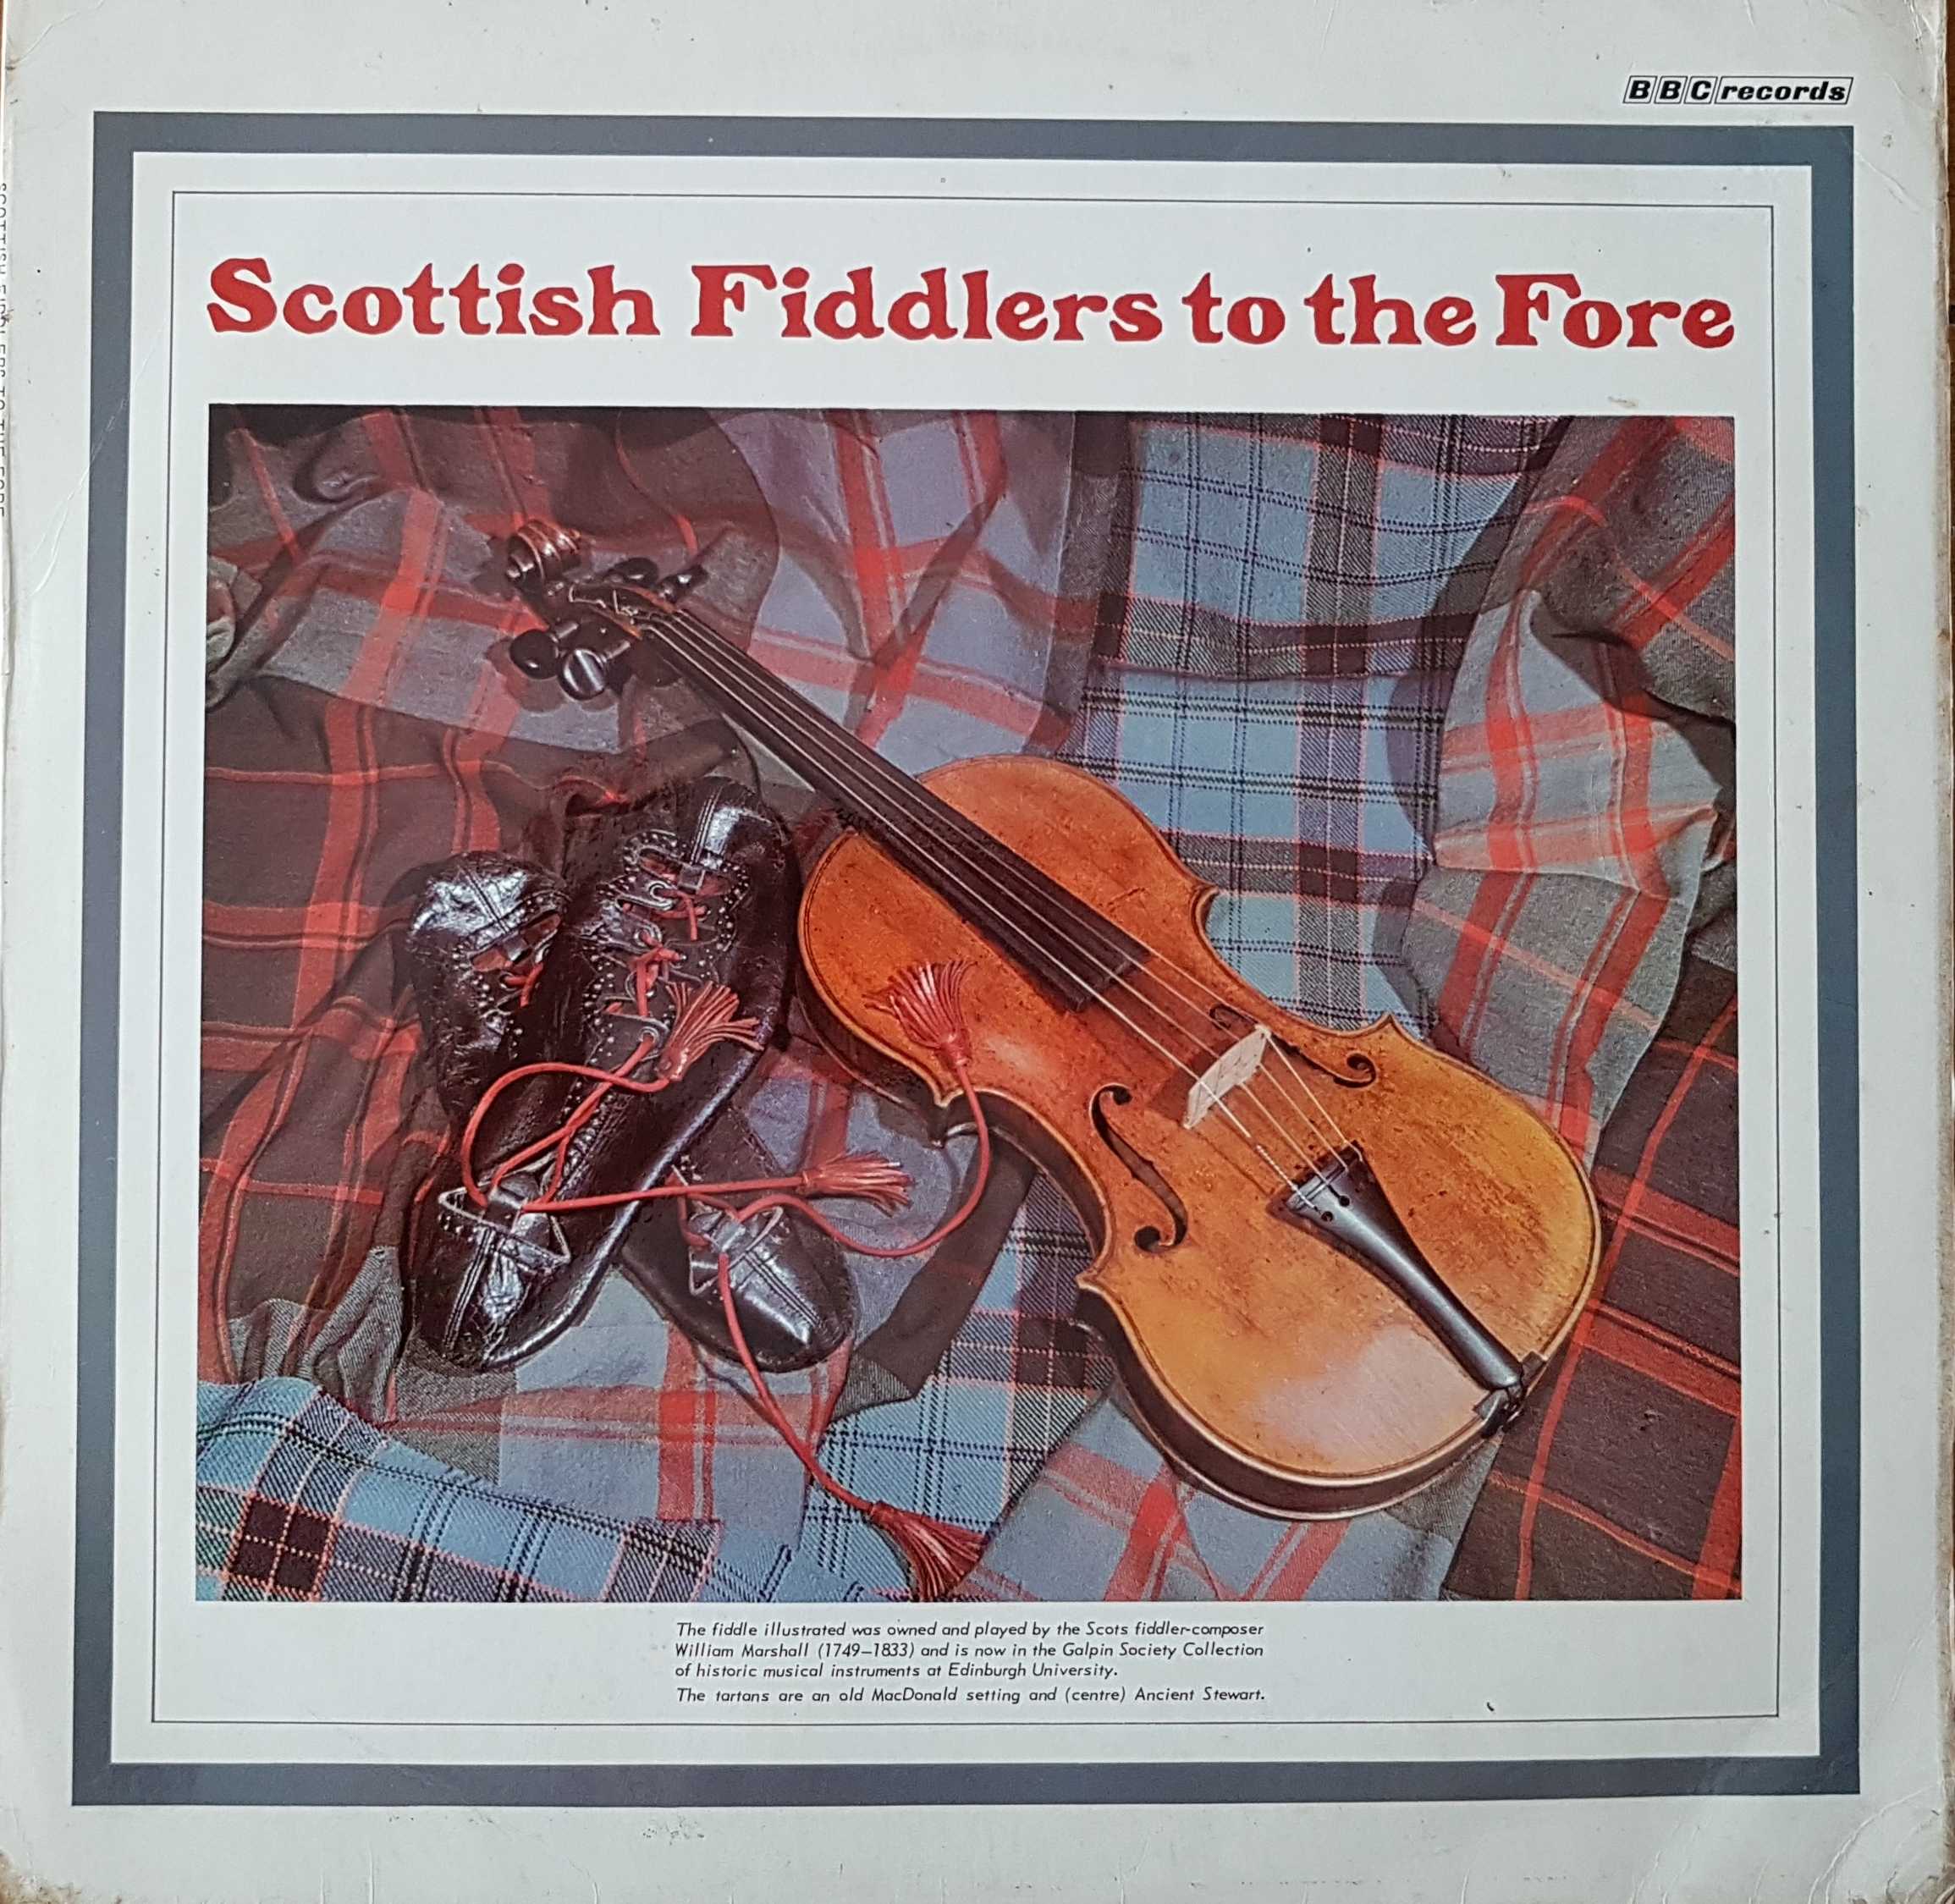 Picture of REB 84 Scottish fiddlers to the fore by artist Various from the BBC albums - Records and Tapes library